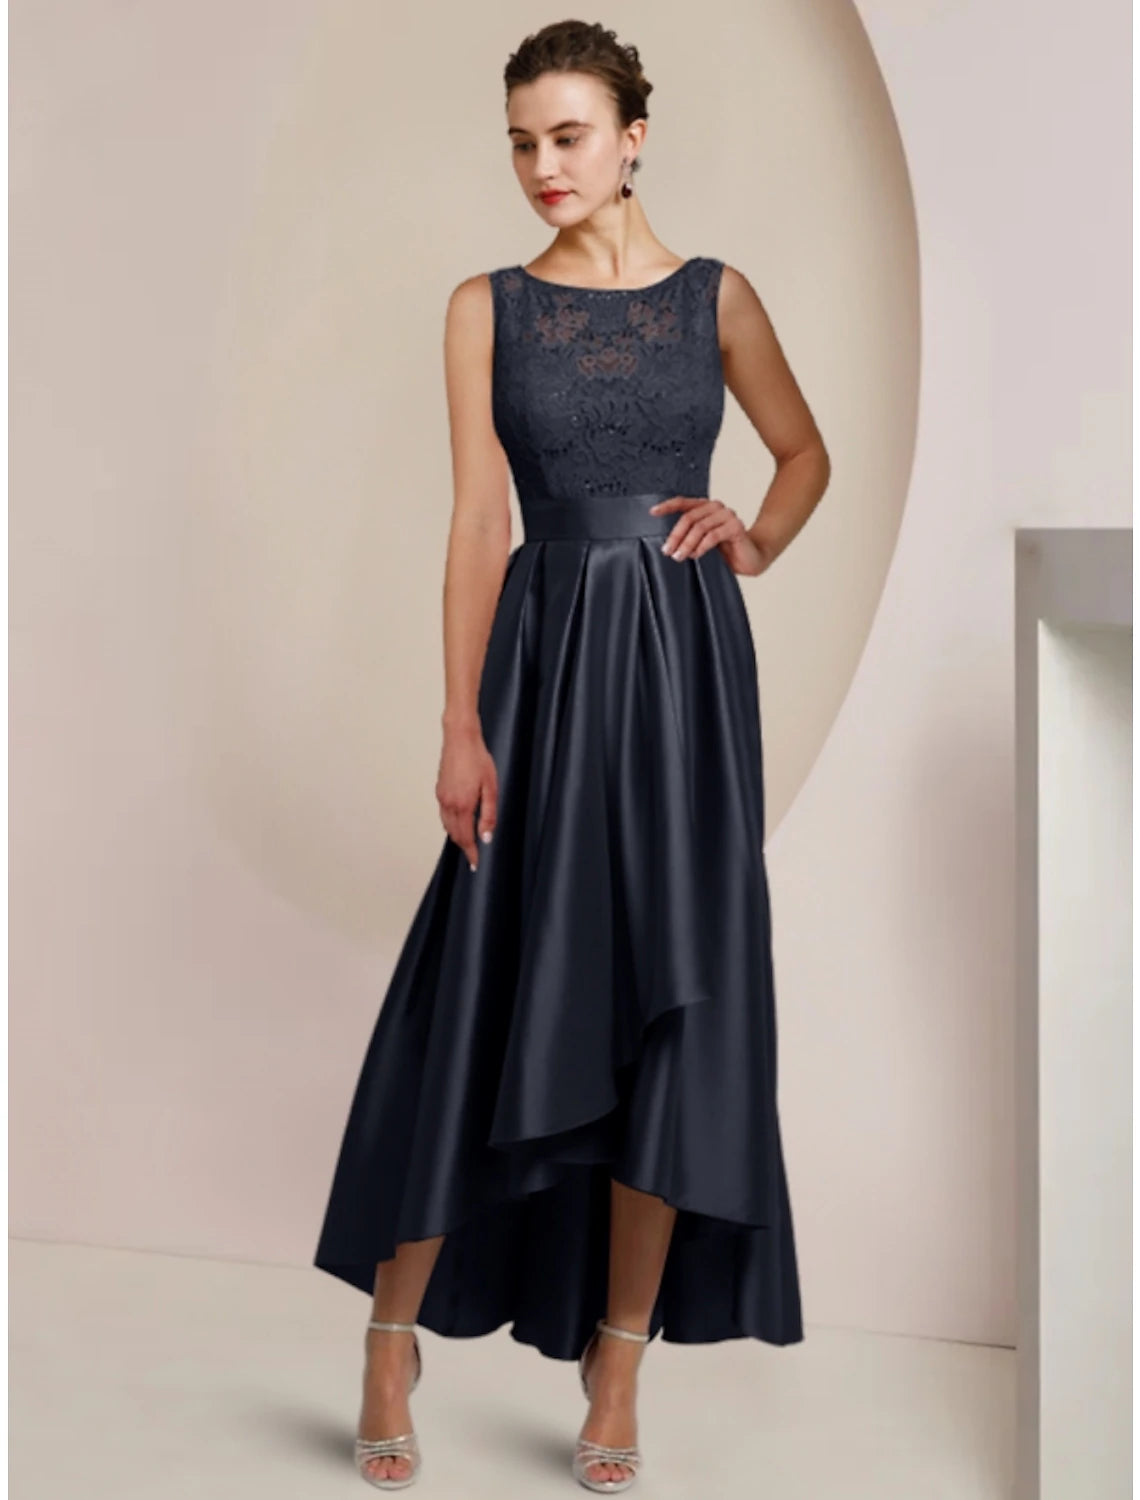 Sheath / Column Mother of the Bride Dress Wedding Guest Minimalist Elegant Scoop Neck Asymmetrical Ankle Length Satin Lace Half Sleeve with Pleats Solid Color